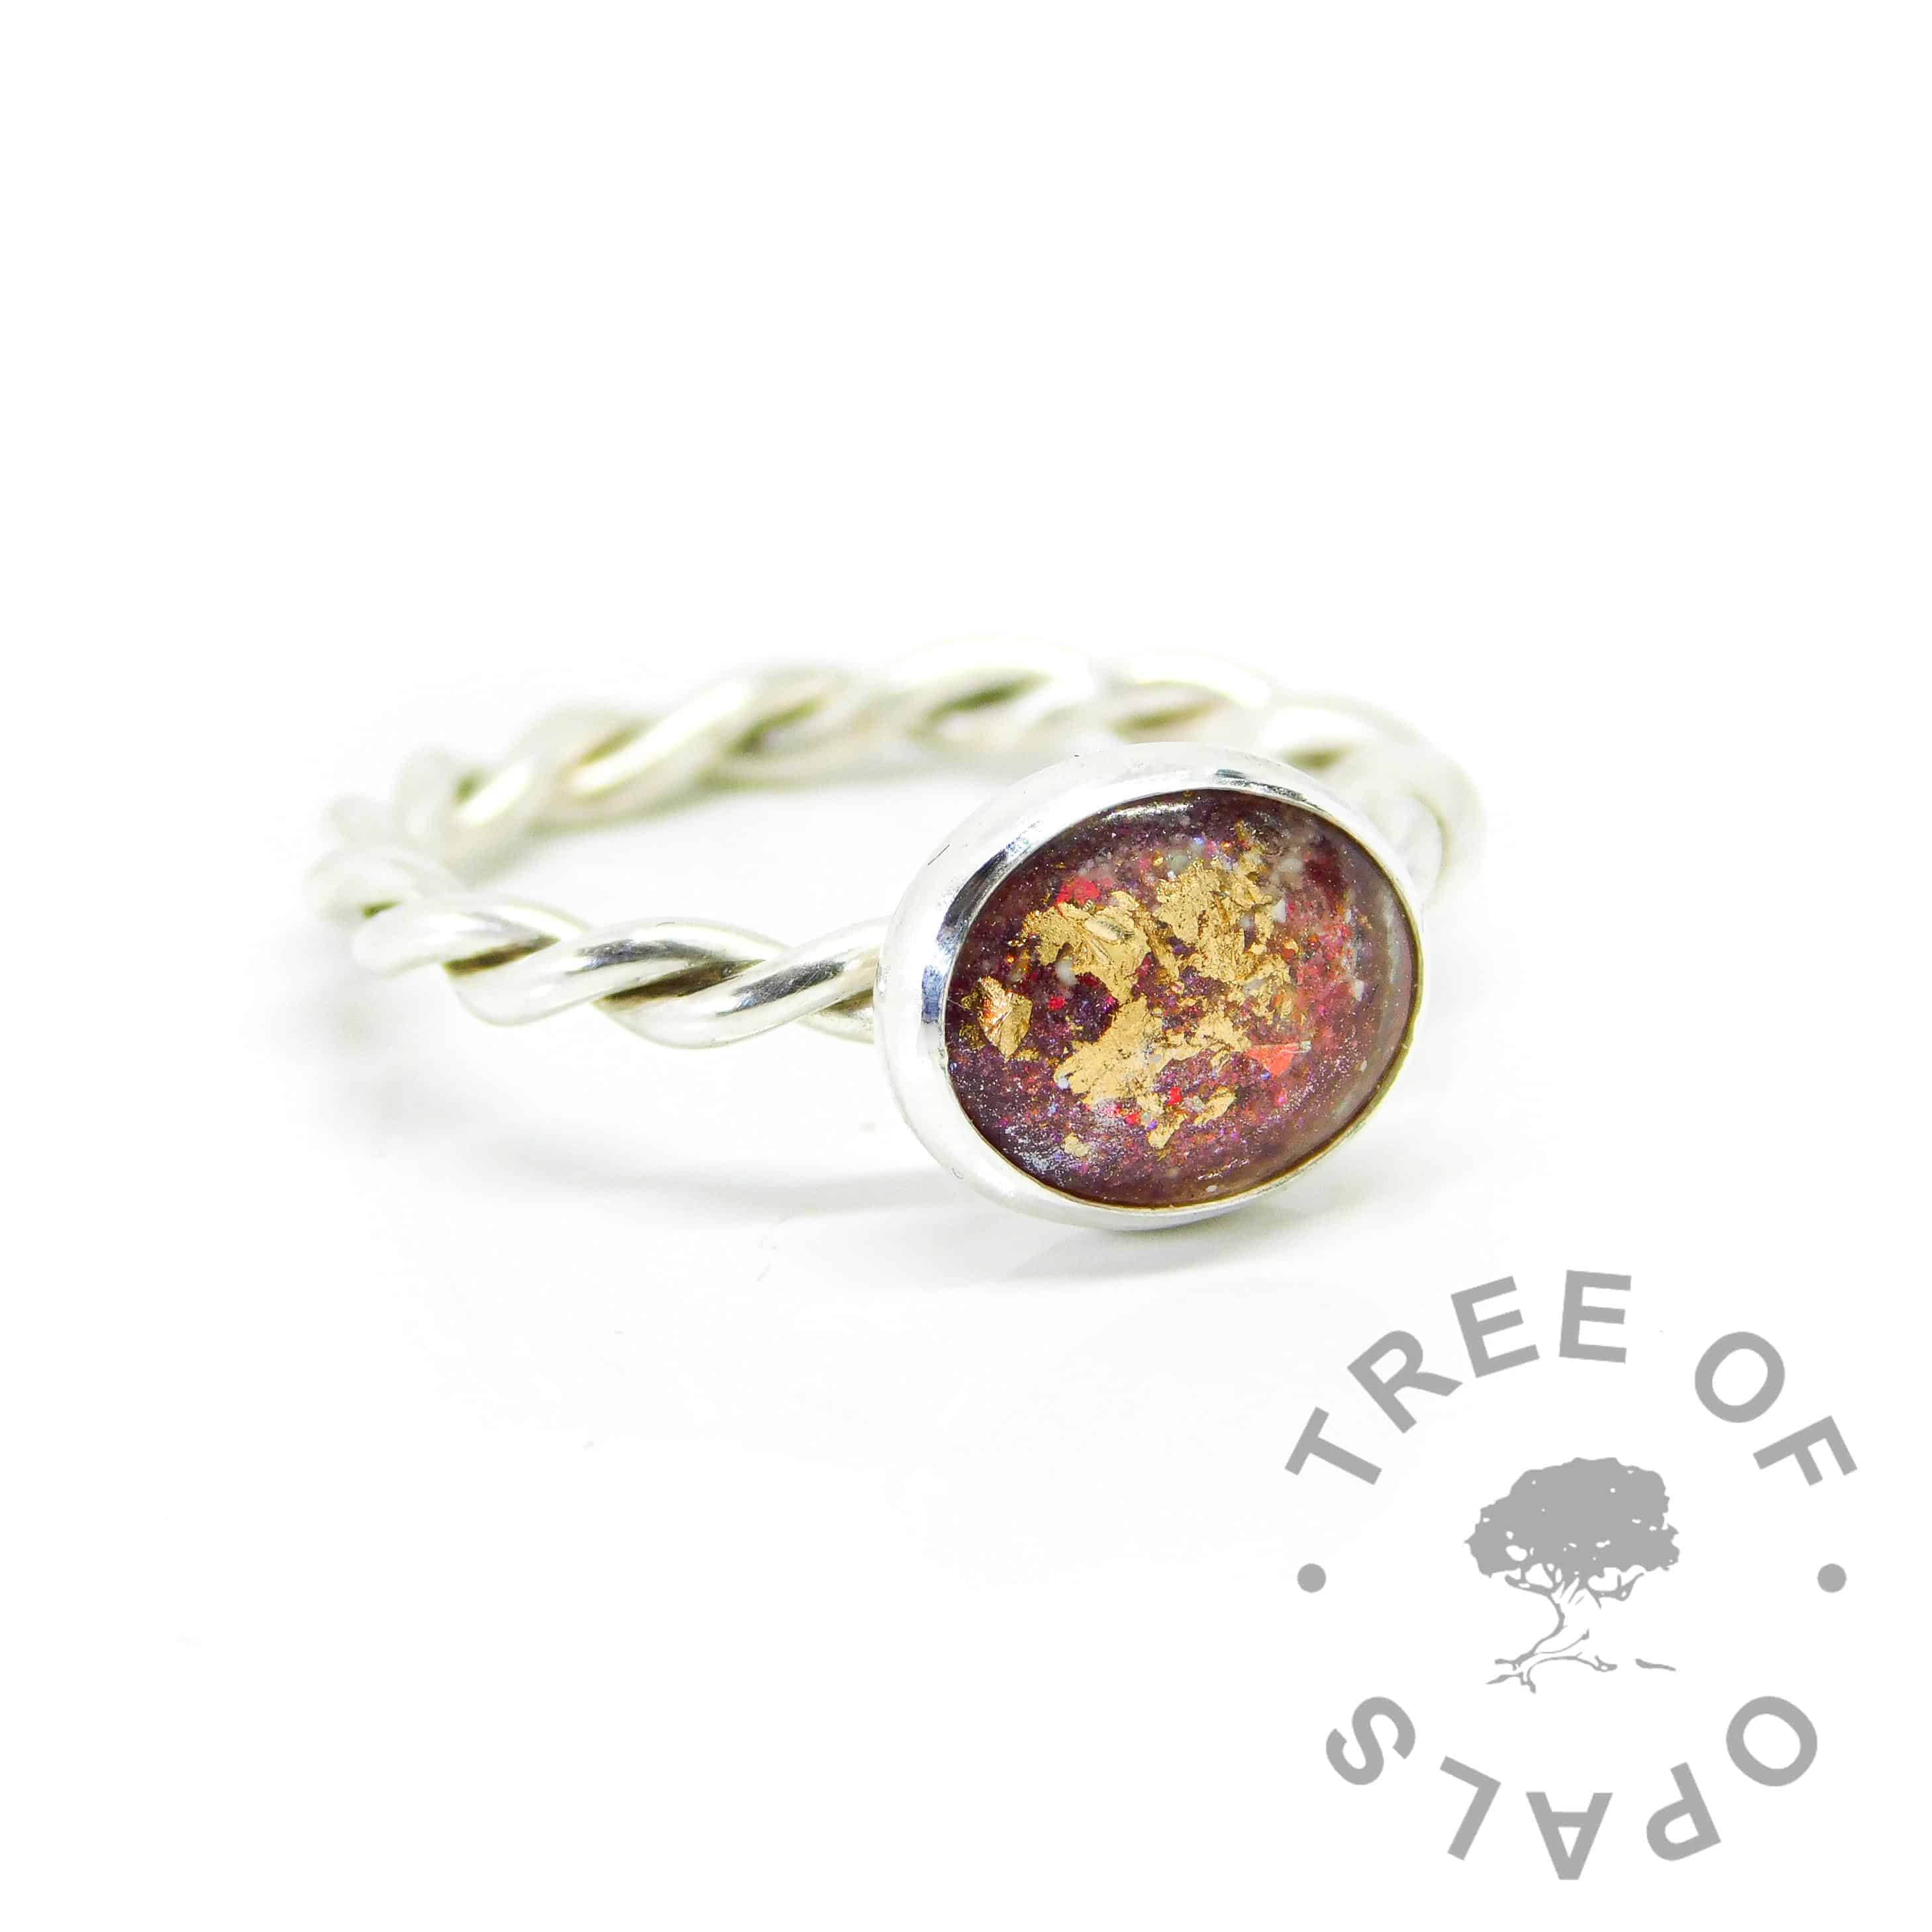 Ashes ring on twisted band with dragon's blood red resin sparkle mix and rose gold leaf